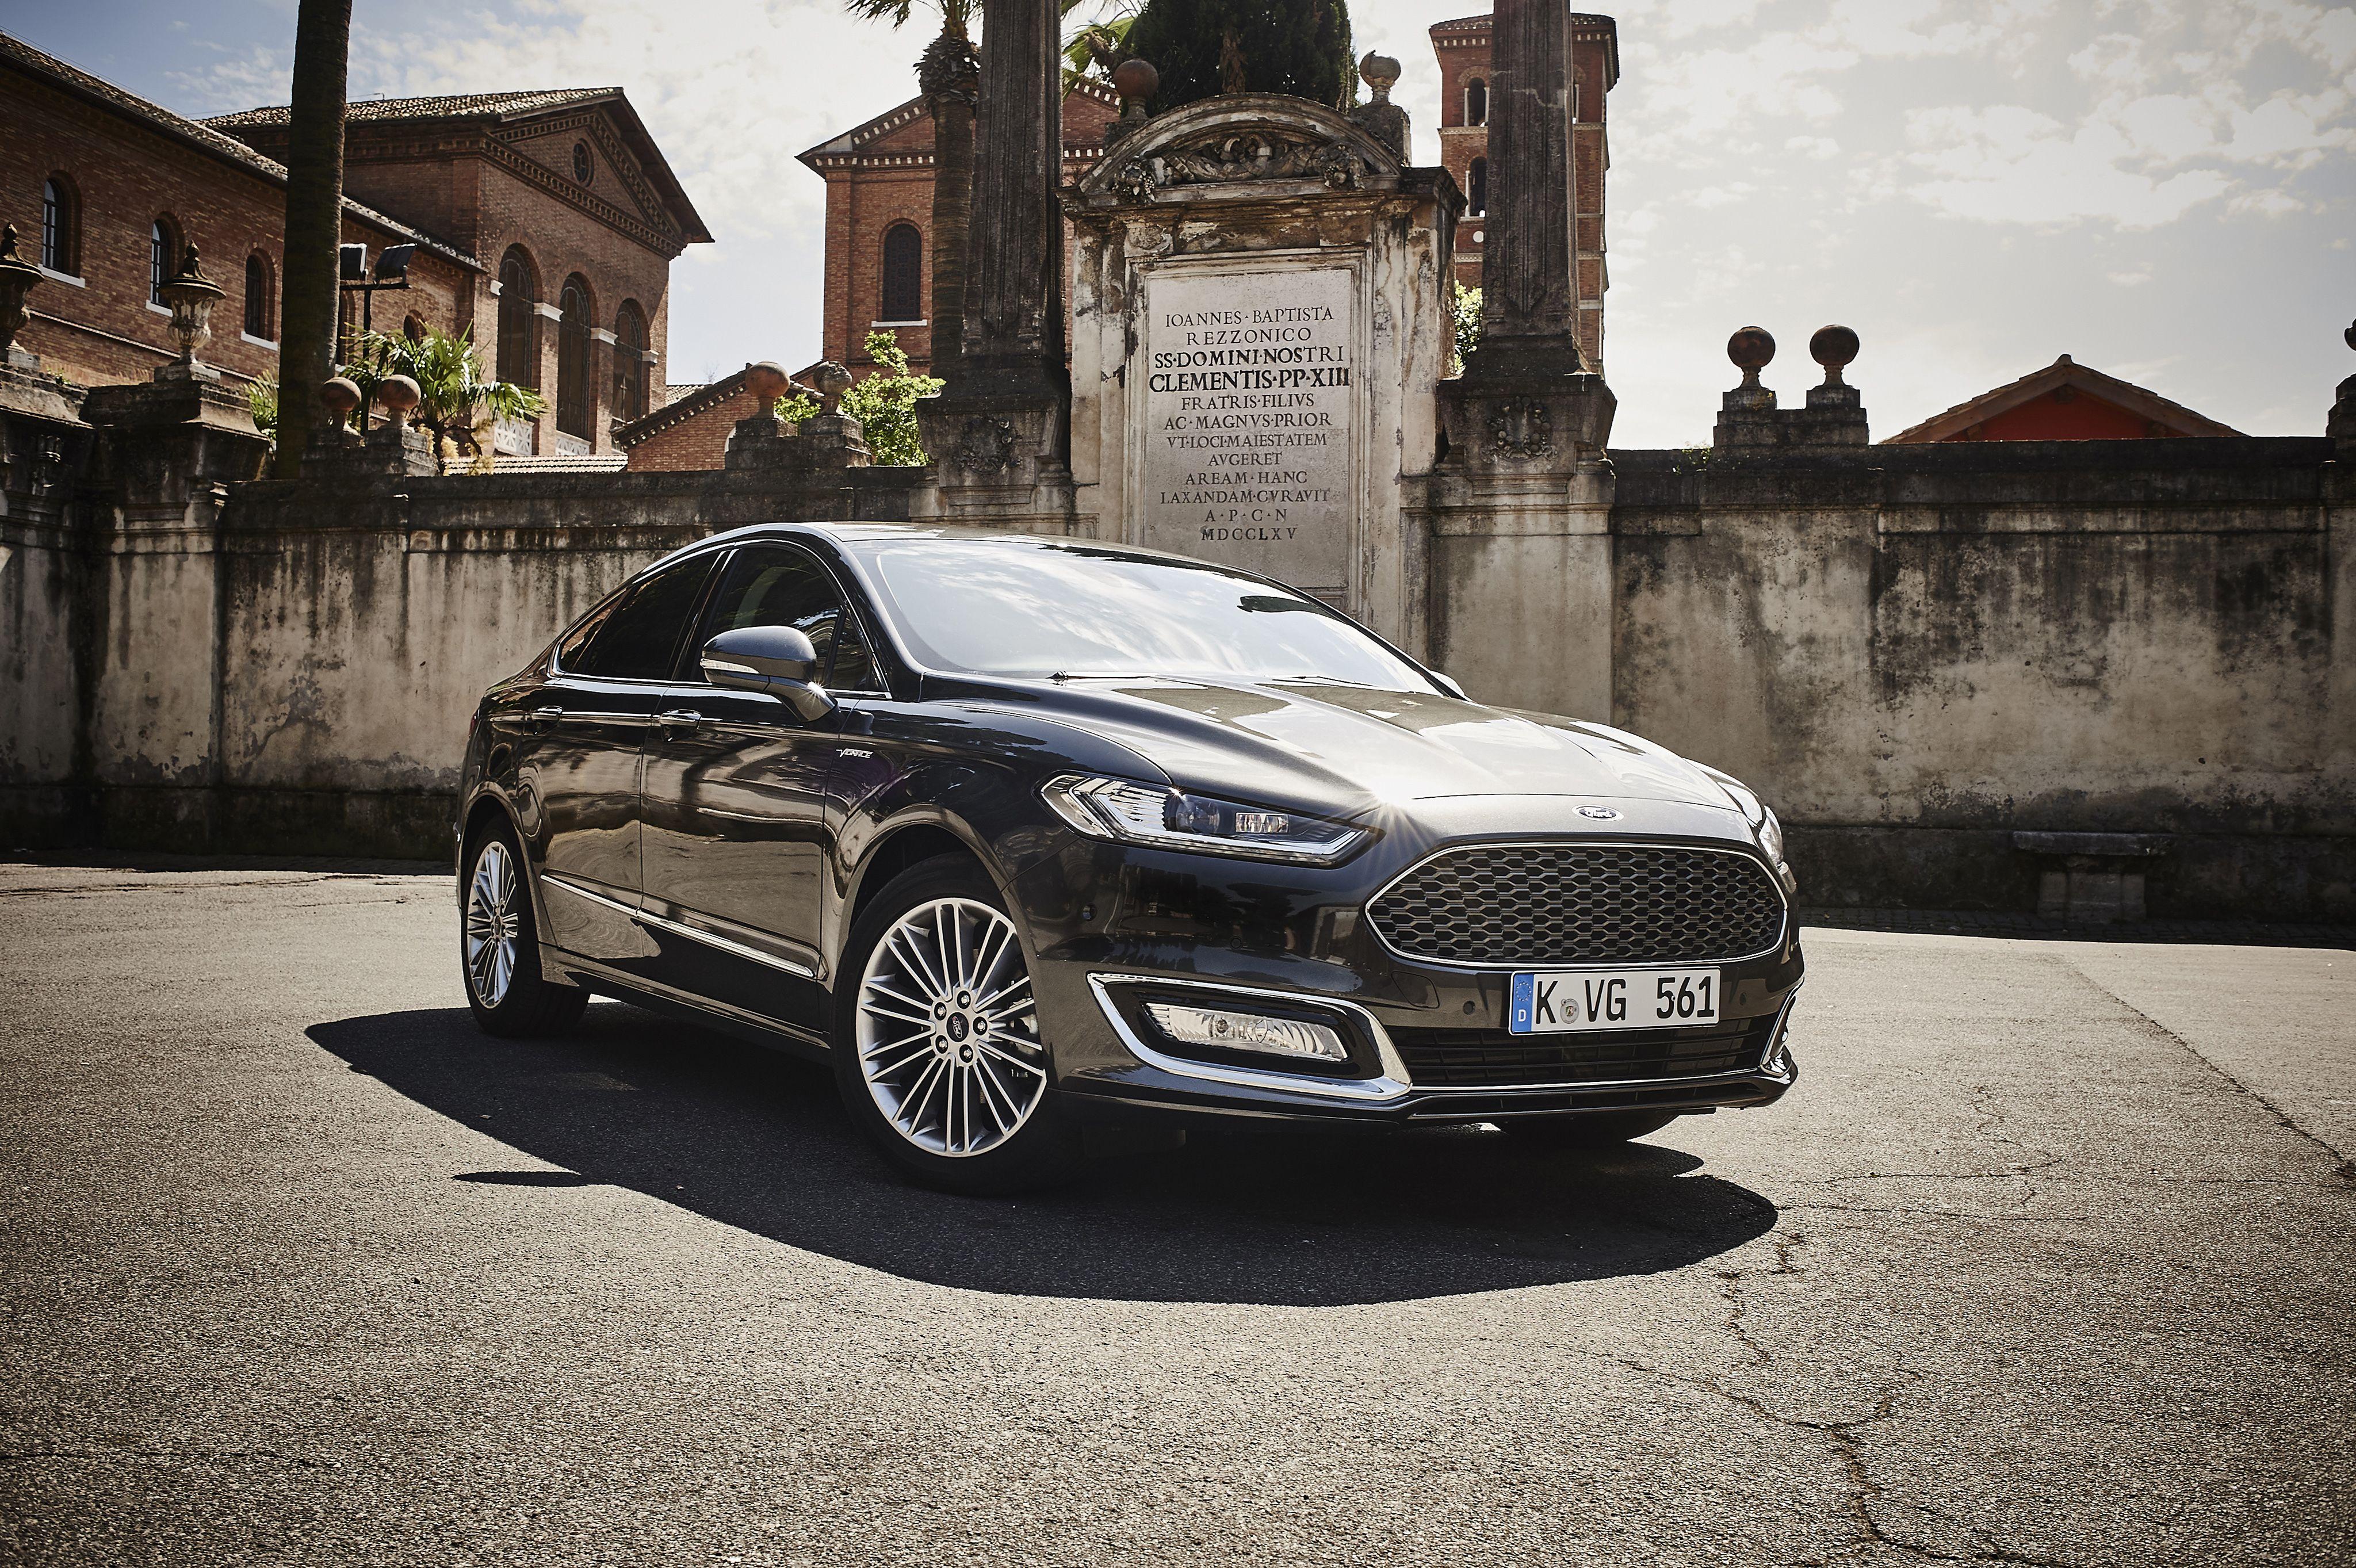 Ford Mondeo Vignale 4k Ultra HD Wallpaper. Background Image